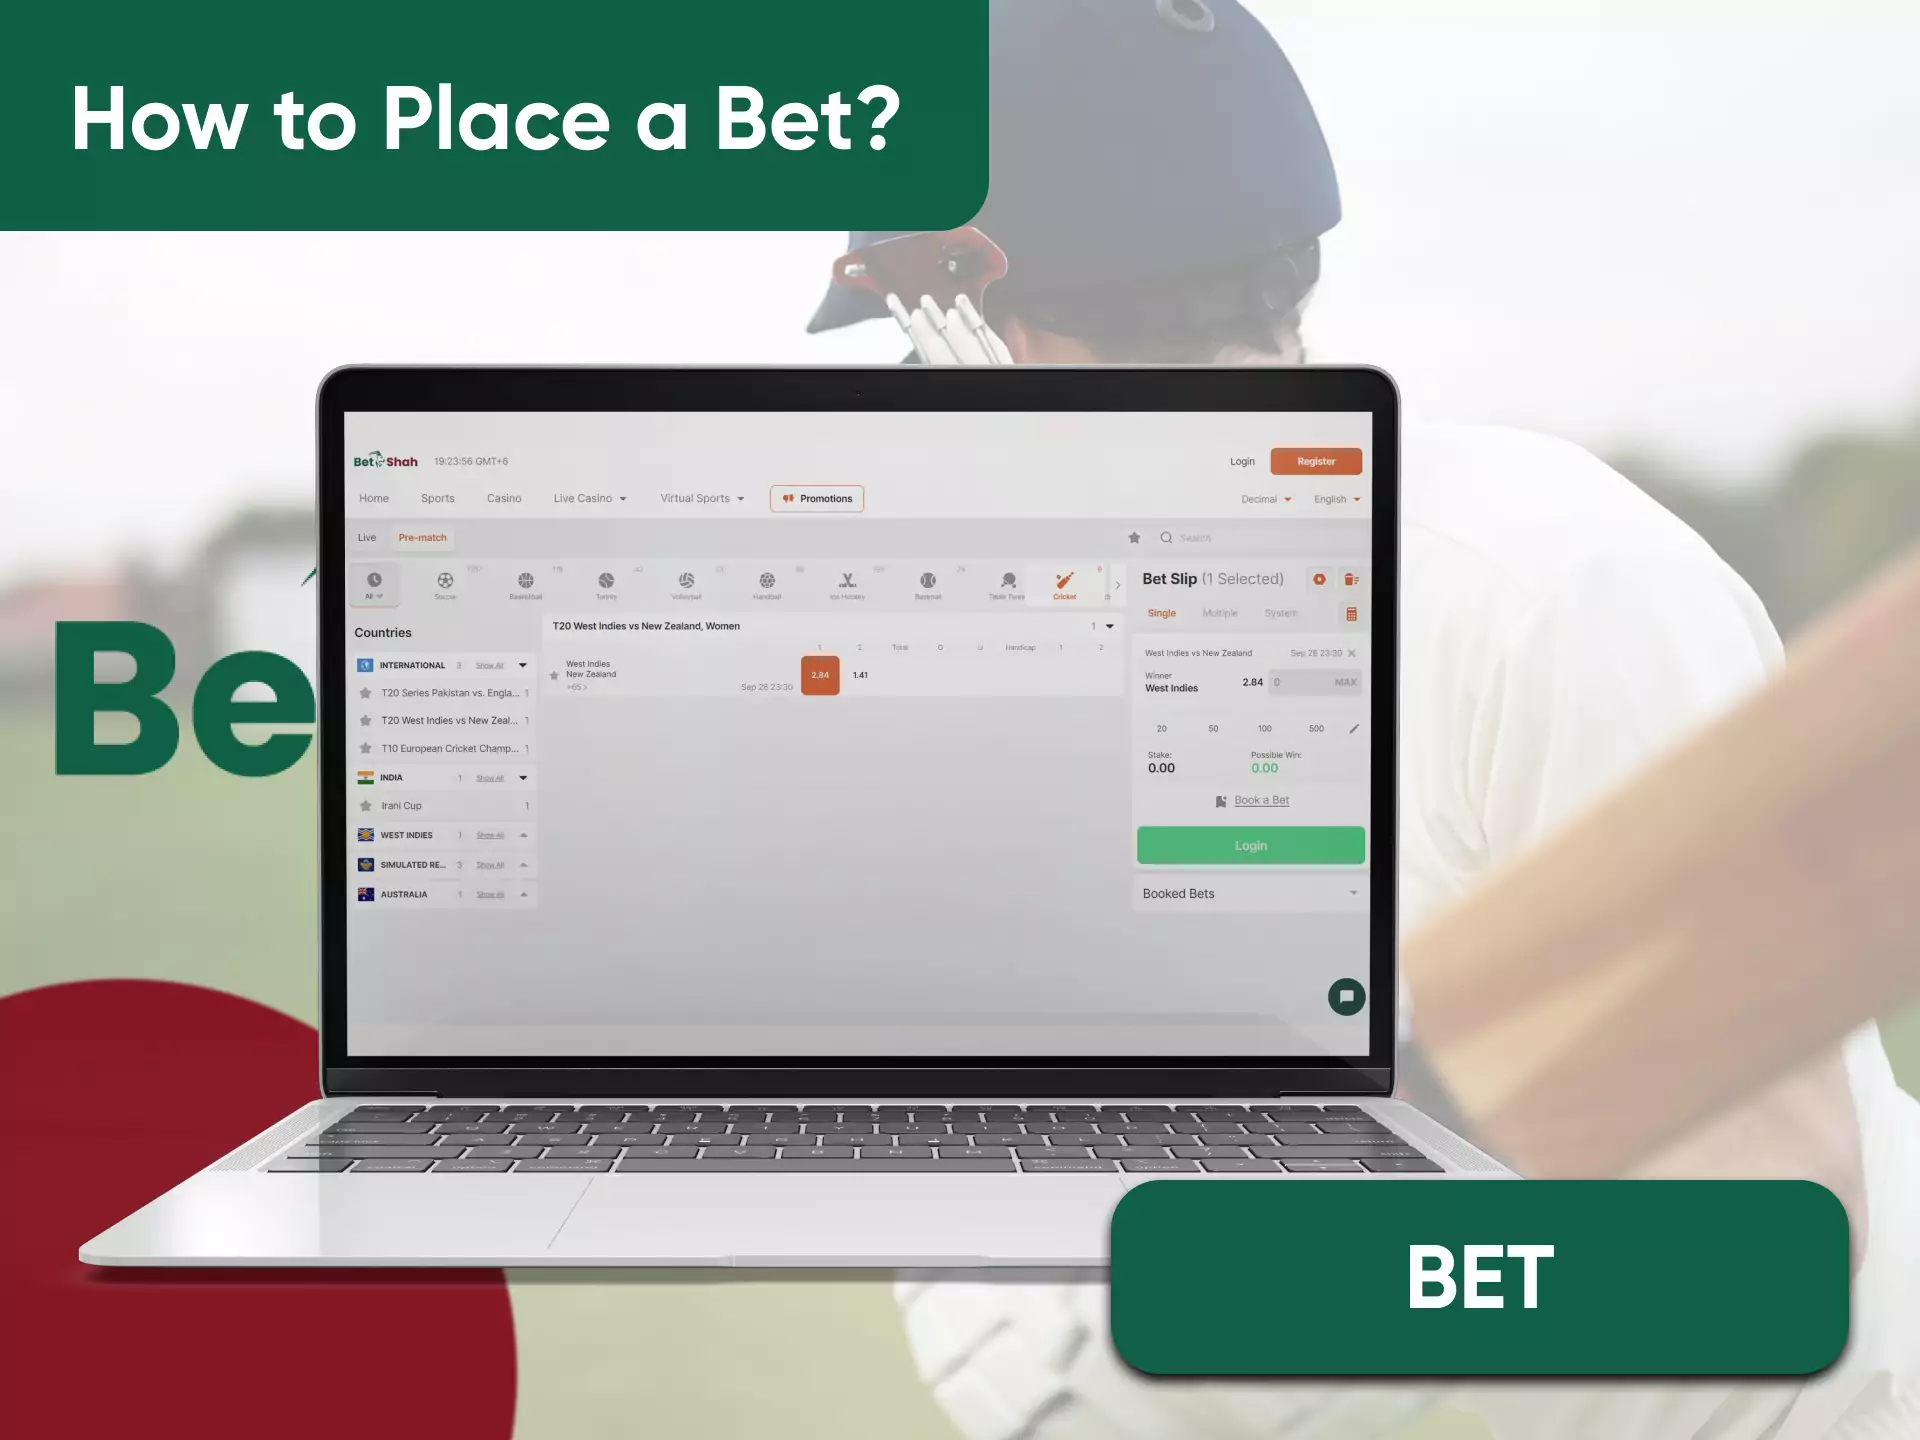 Choose an event among available ones at Betshah and make a bet.